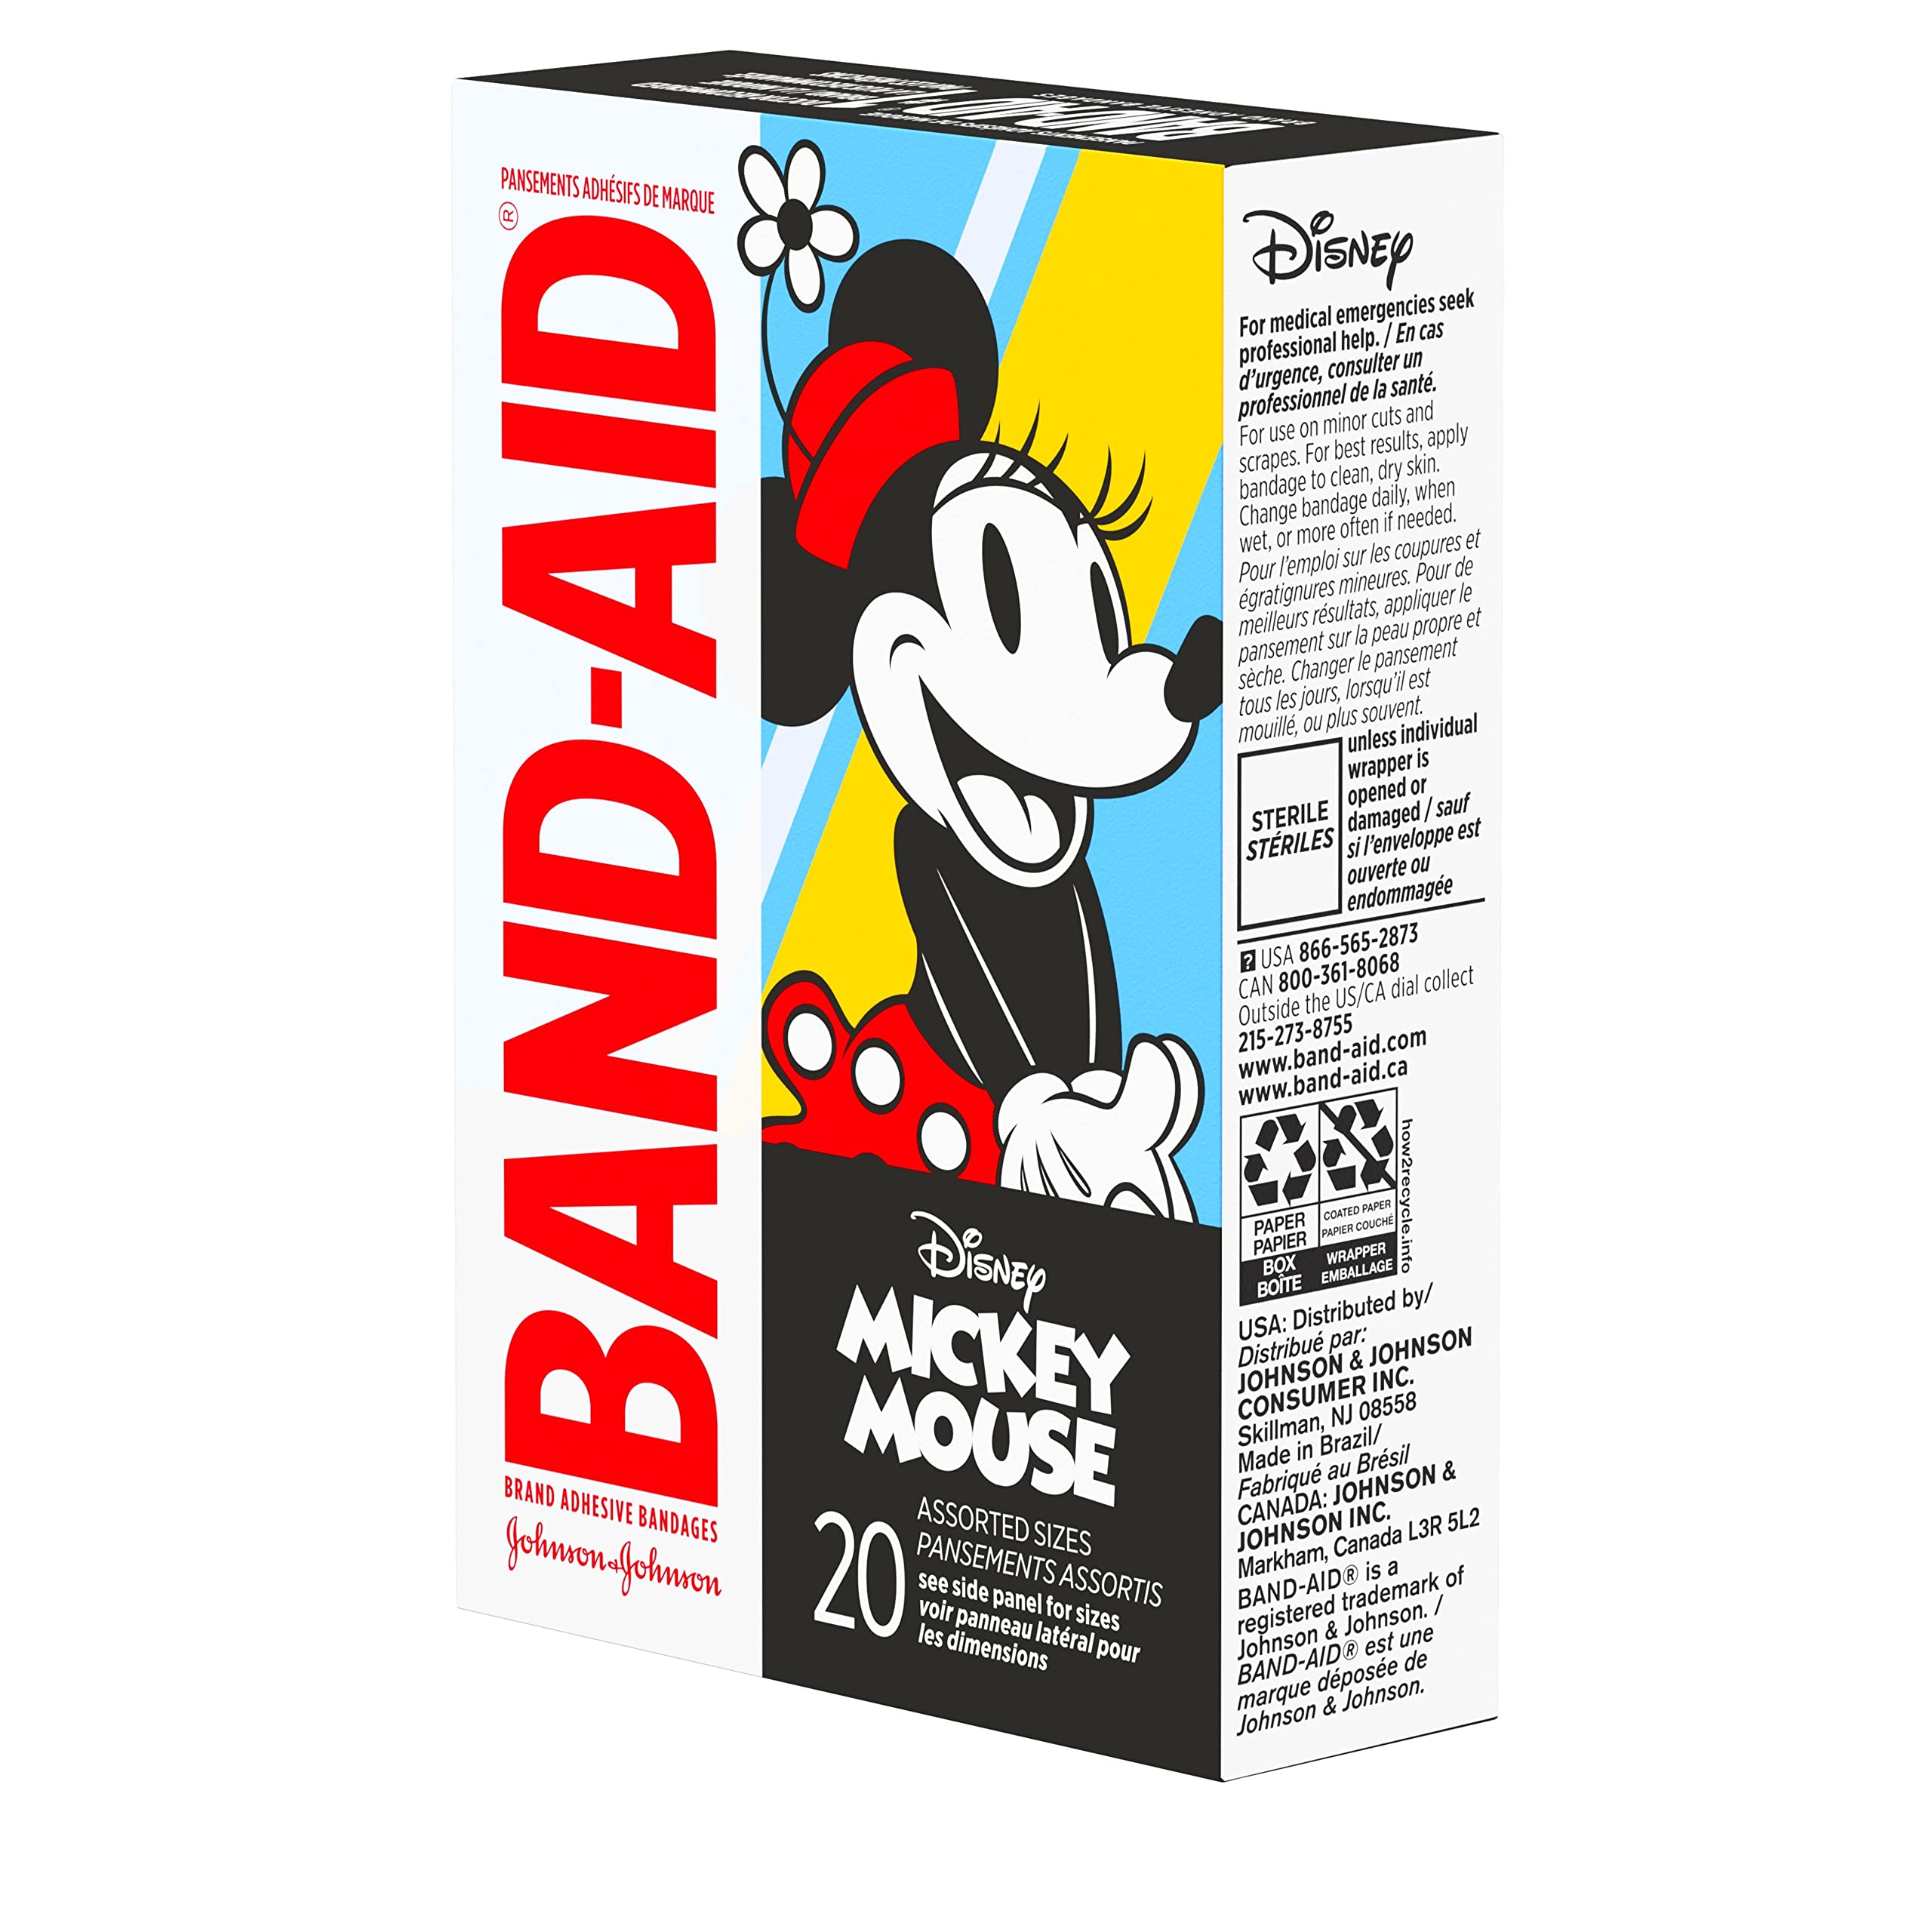 Band-Aid Brand Adhesive Bandages for Minor Cuts & Scrapes, Wound Care Featuring Disney's Mickey Mouse, Fun Bandages for Kids and Toddlers, Assorted Sizes, 20 Count